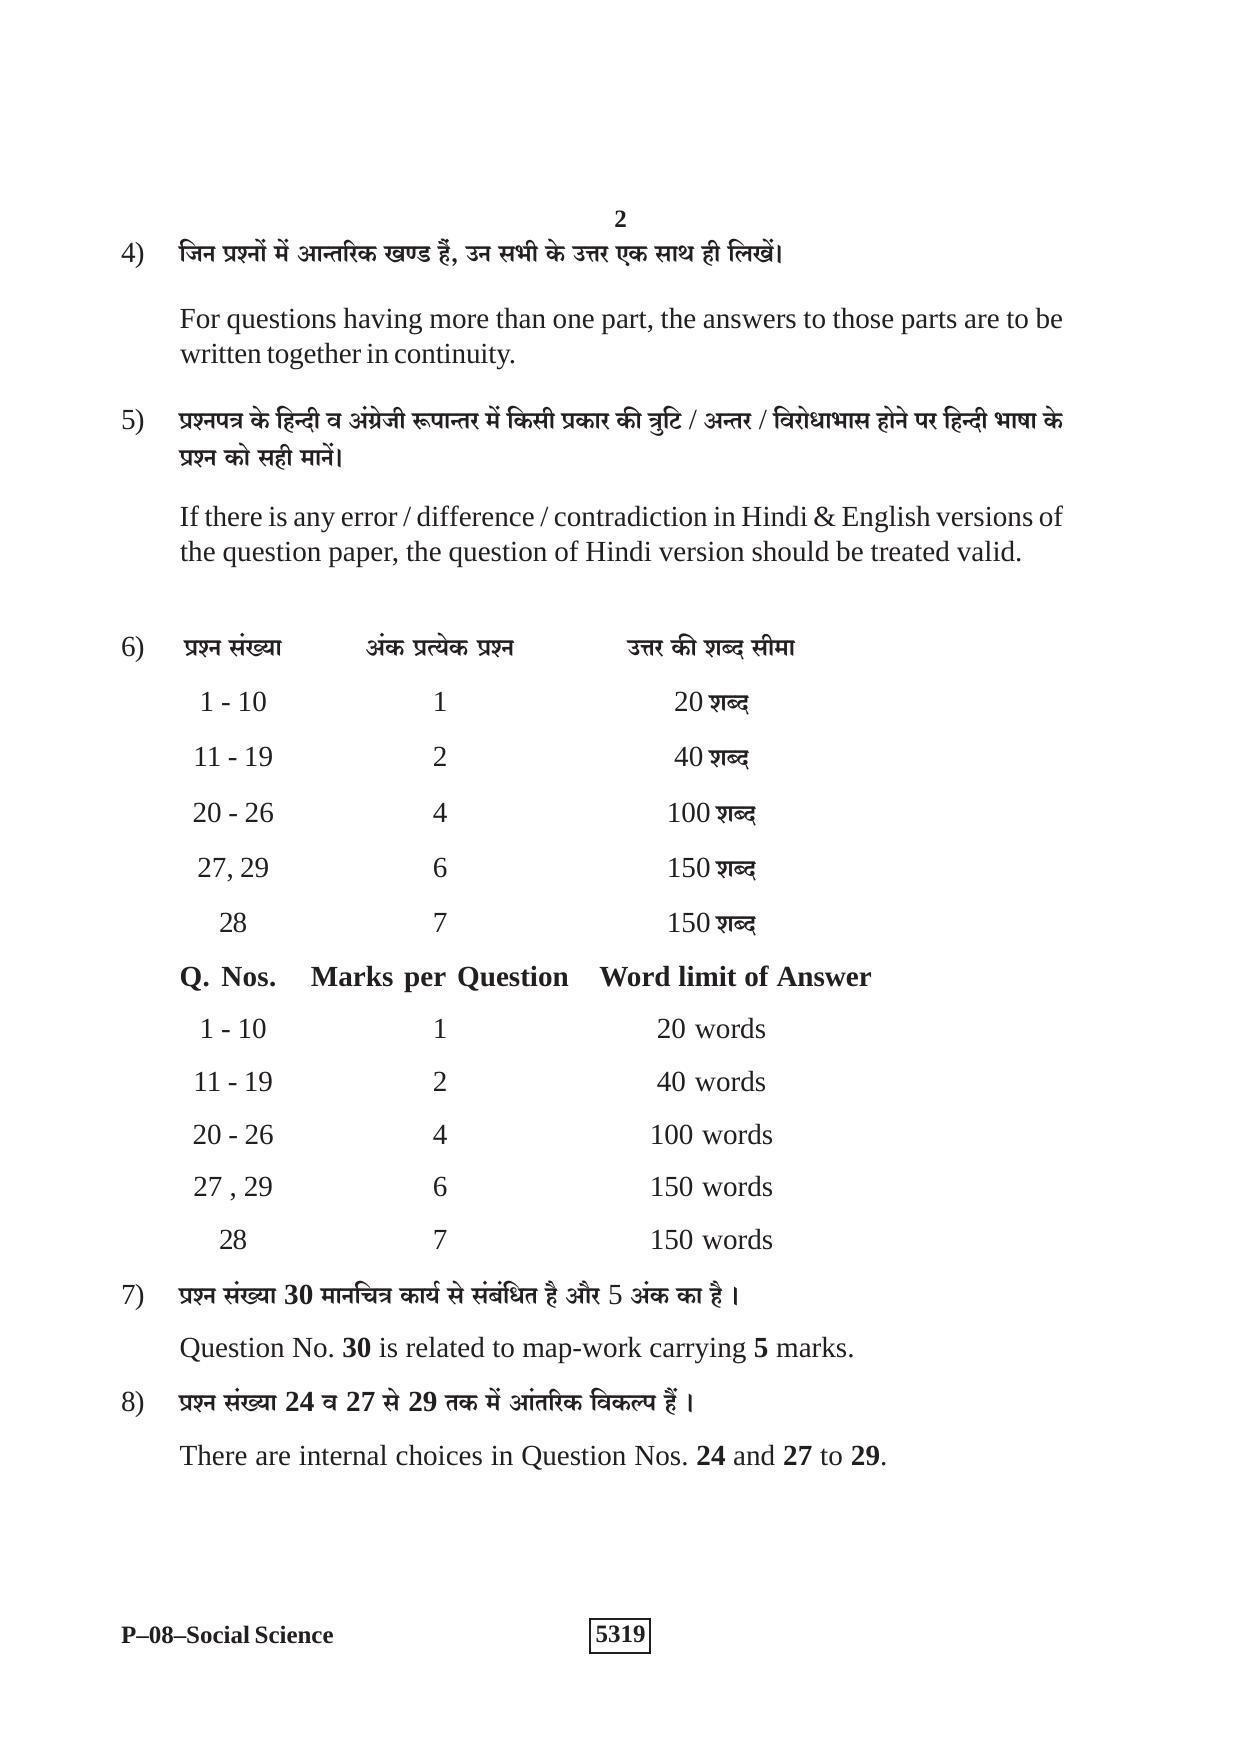 RBSE 2020 Social Science Praveshika Question Paper - Page 2